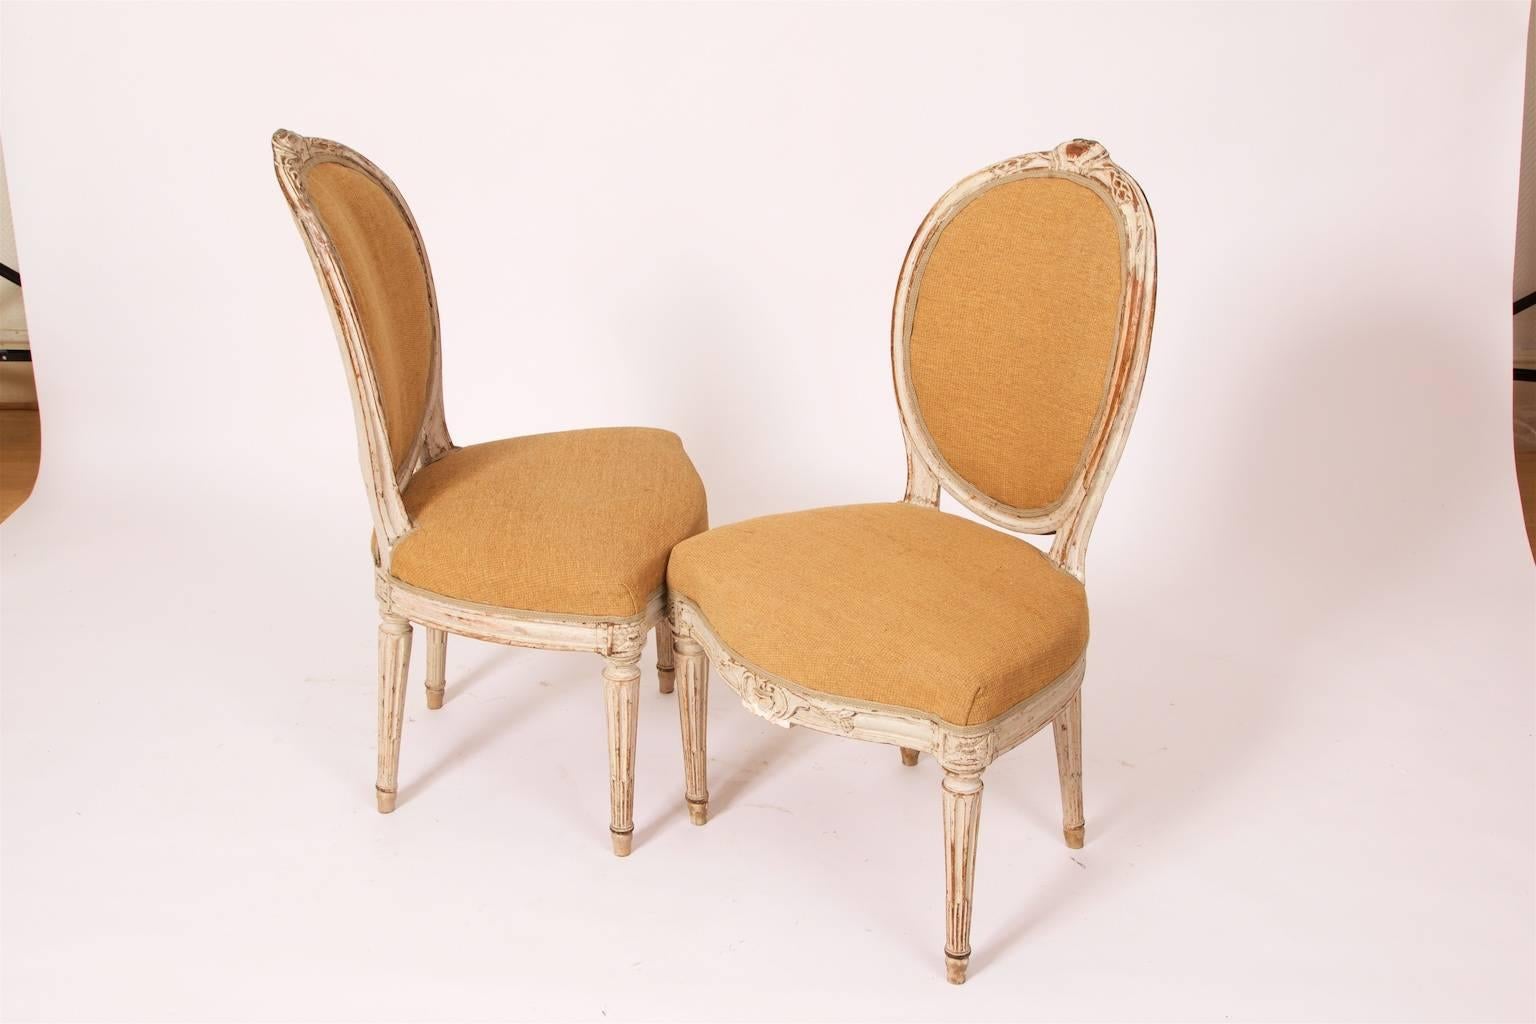 A pair of Georges Jacob chairs, Paris, France, Louis XVI-style, wooden stamped (see images), circa 1765-1775. Dry scraped to original color and retouched
